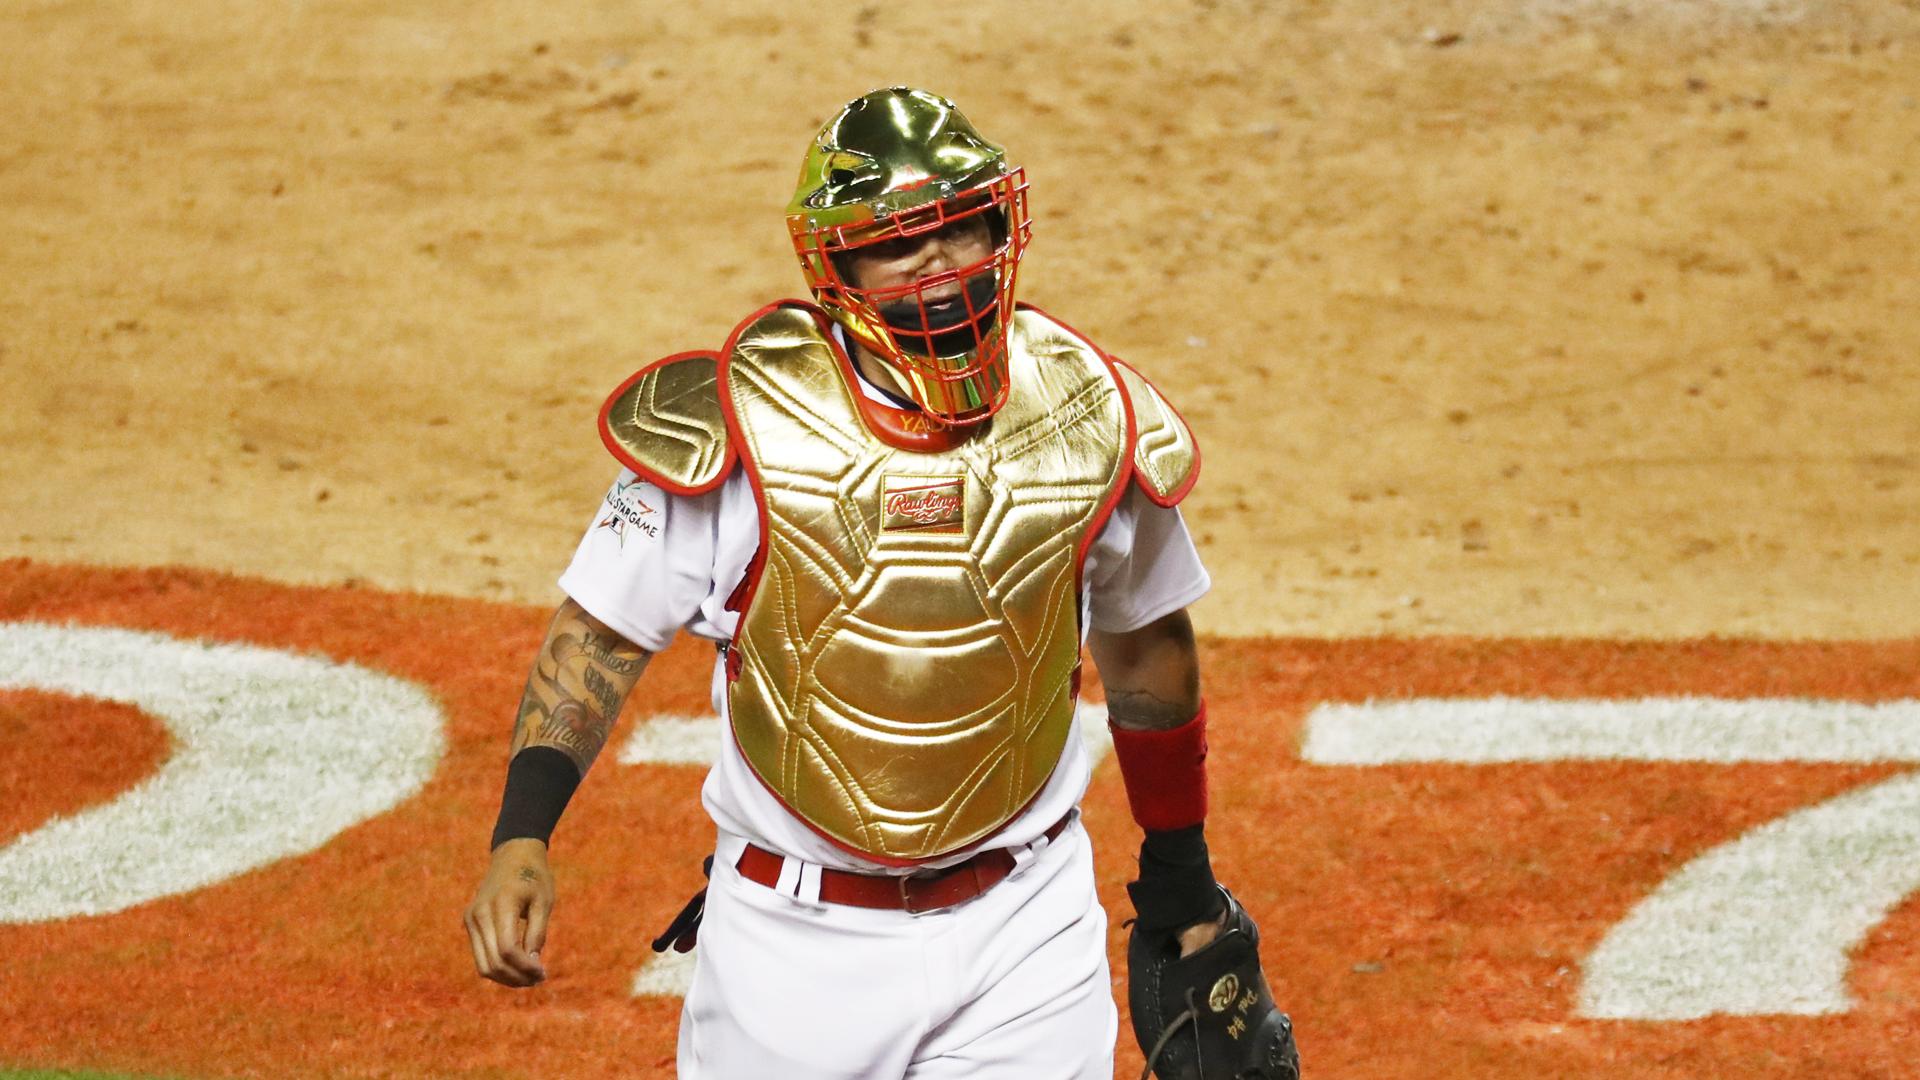 Yadier Molina Wore Some Pretty Nifty Catching Gear In The All Star Game